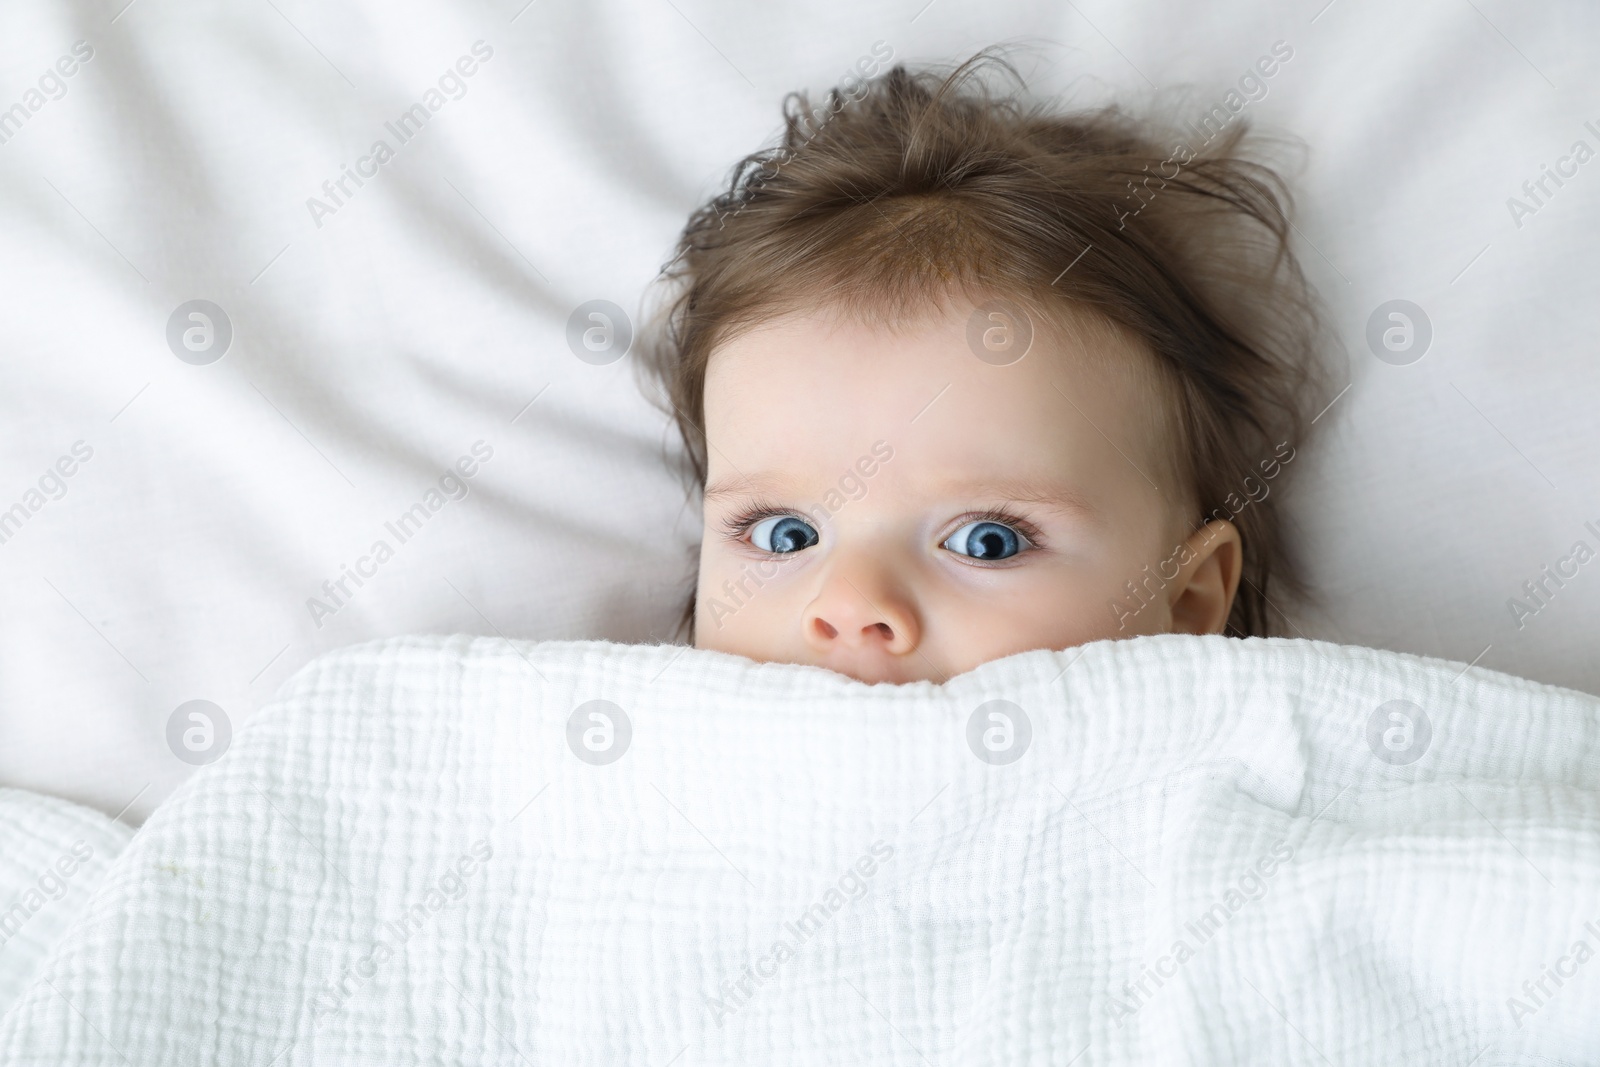 Photo of Cute little baby lying under blanket on soft bed, top view